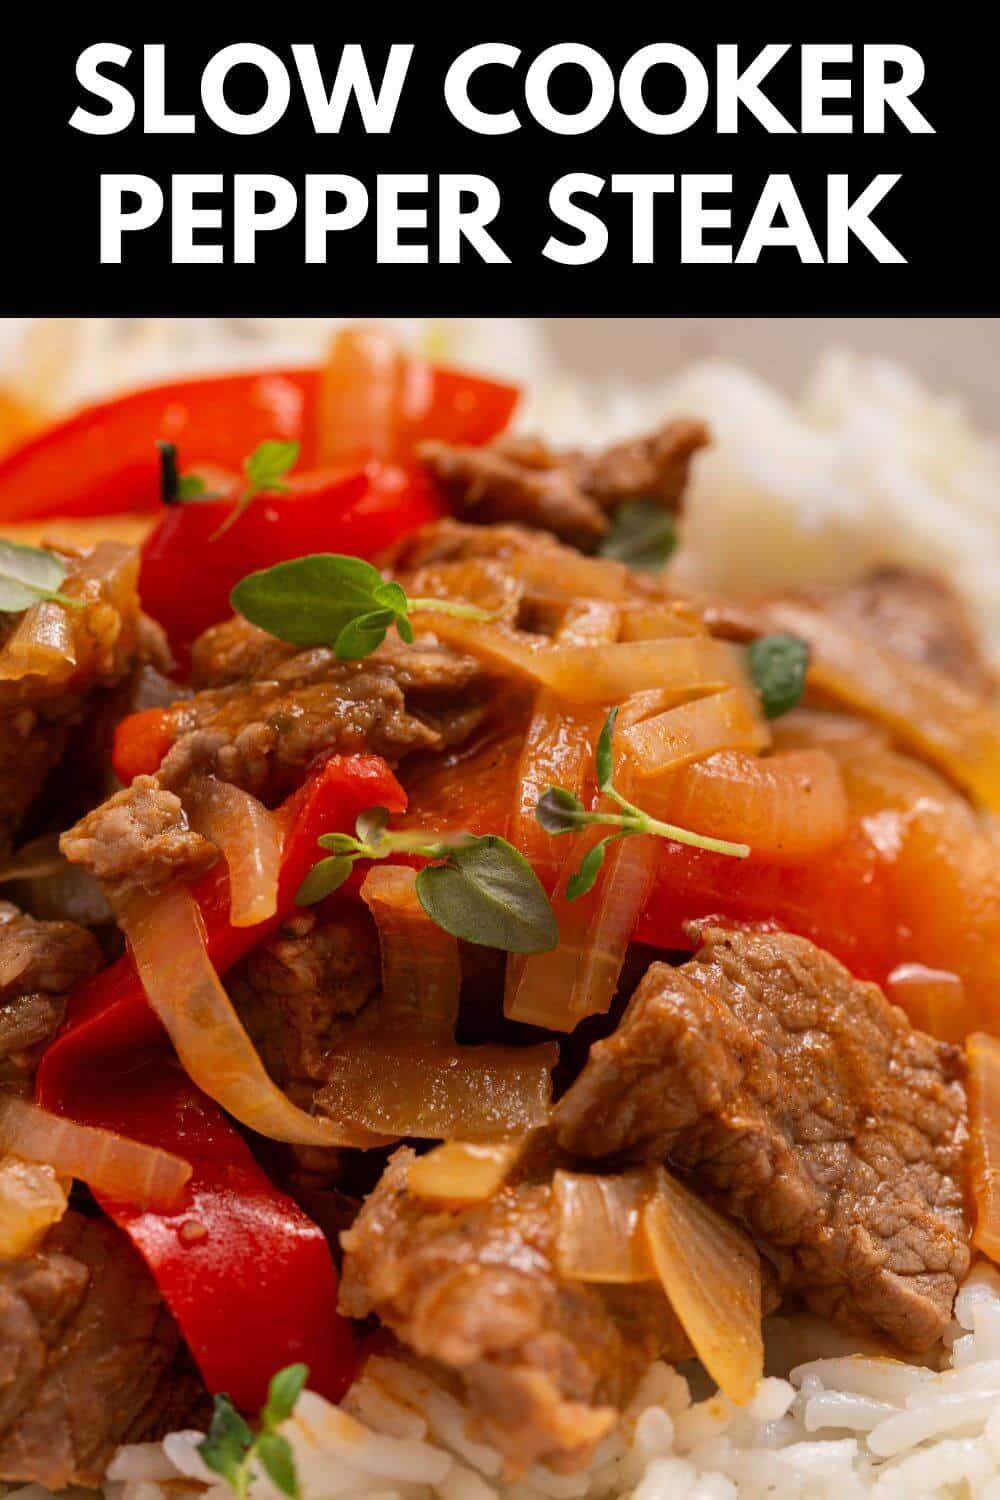 Slow cooker pepper steak with rice and herbs.